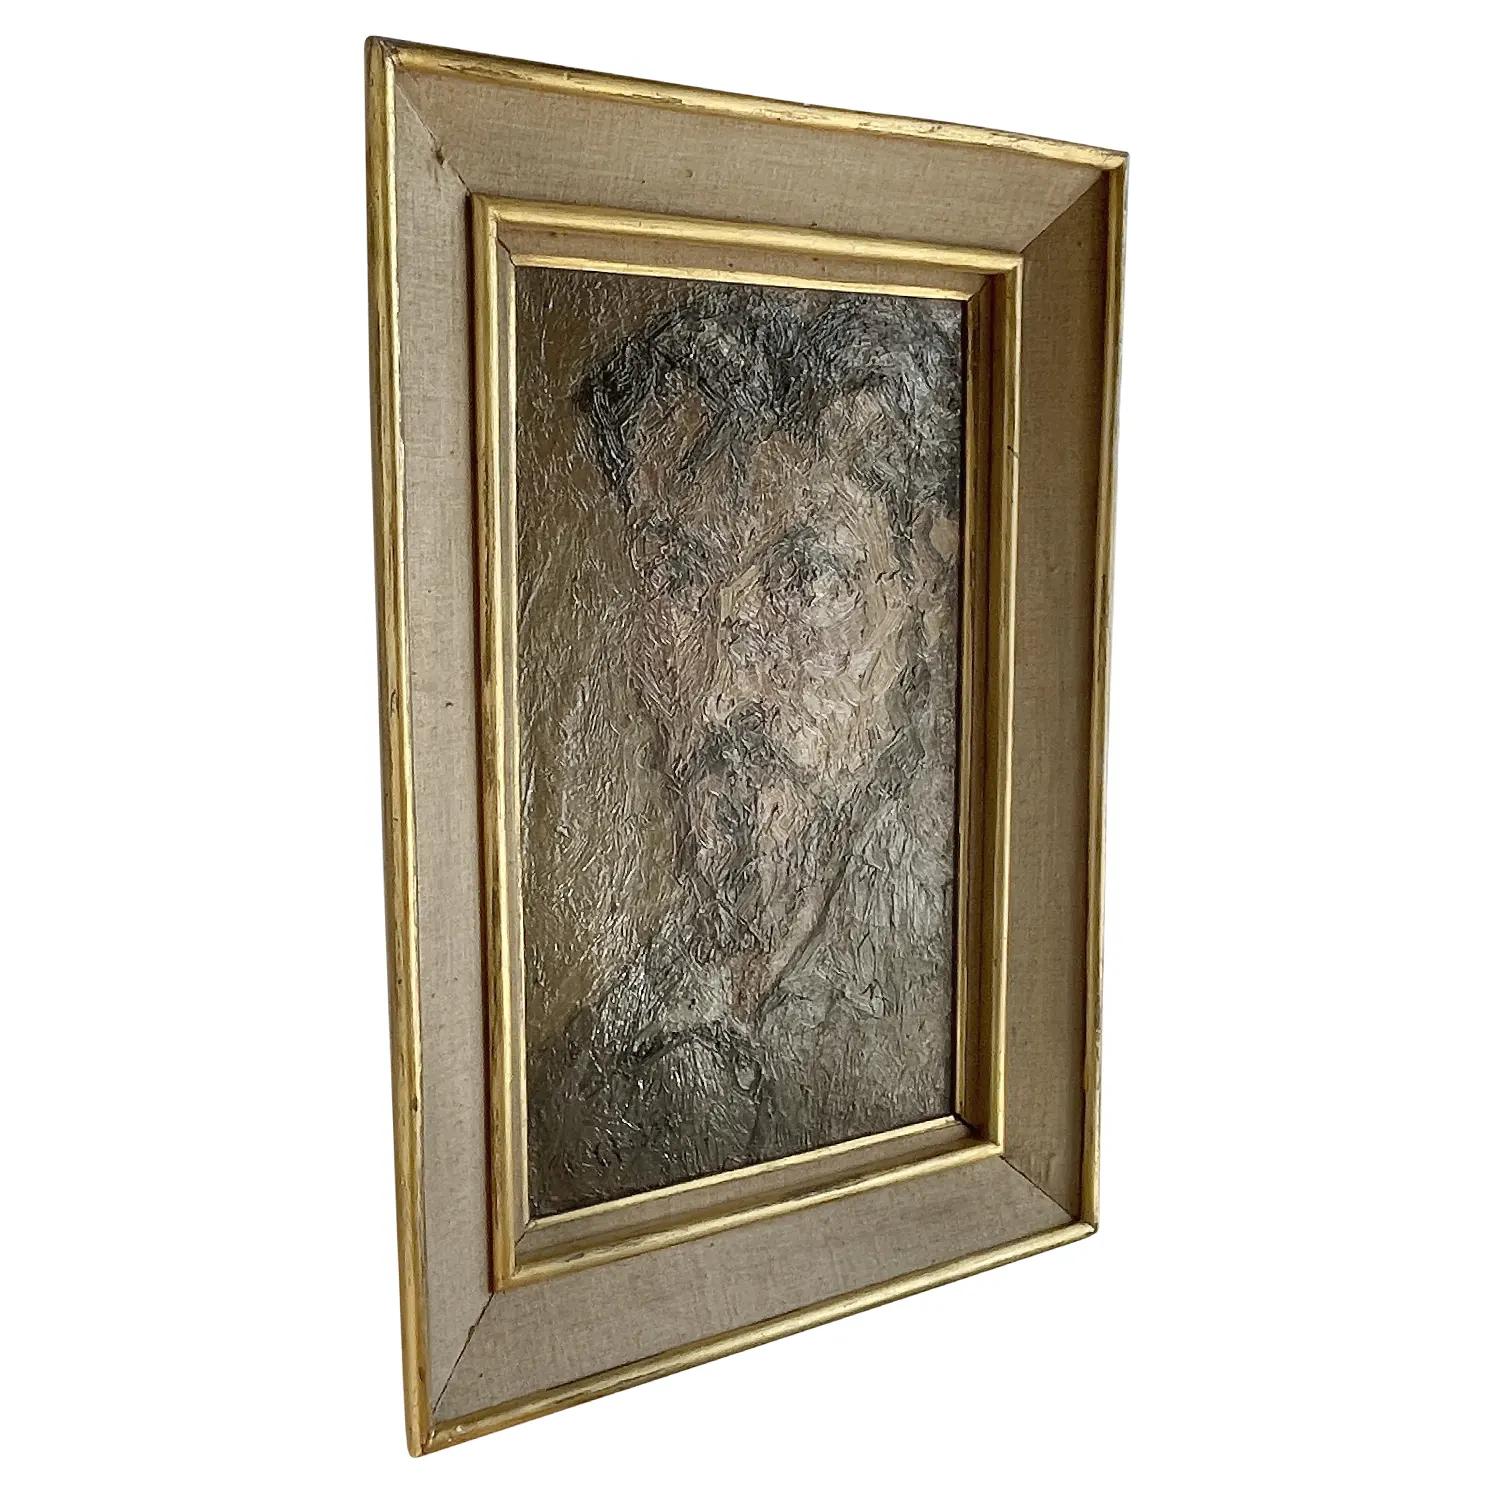 A dark-grey, green vintage Mid-Century Modern French self-portrait oil on canvas painting of Daniel Clesse in a gilded wood frame, in good condition. Signed on the lower right. Wear consistent with age and use. Dated 1961, Paris, France.

Without